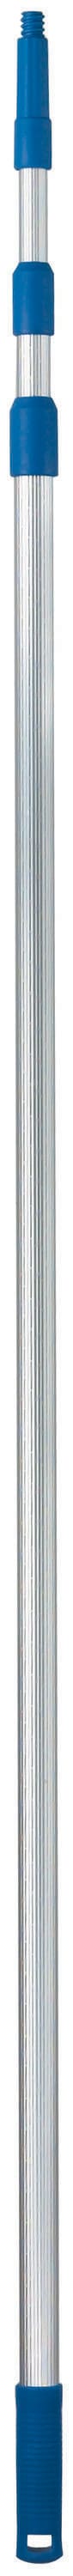 Lowe's 6' to 12' Telescoping Threaded Extension Pole - Each